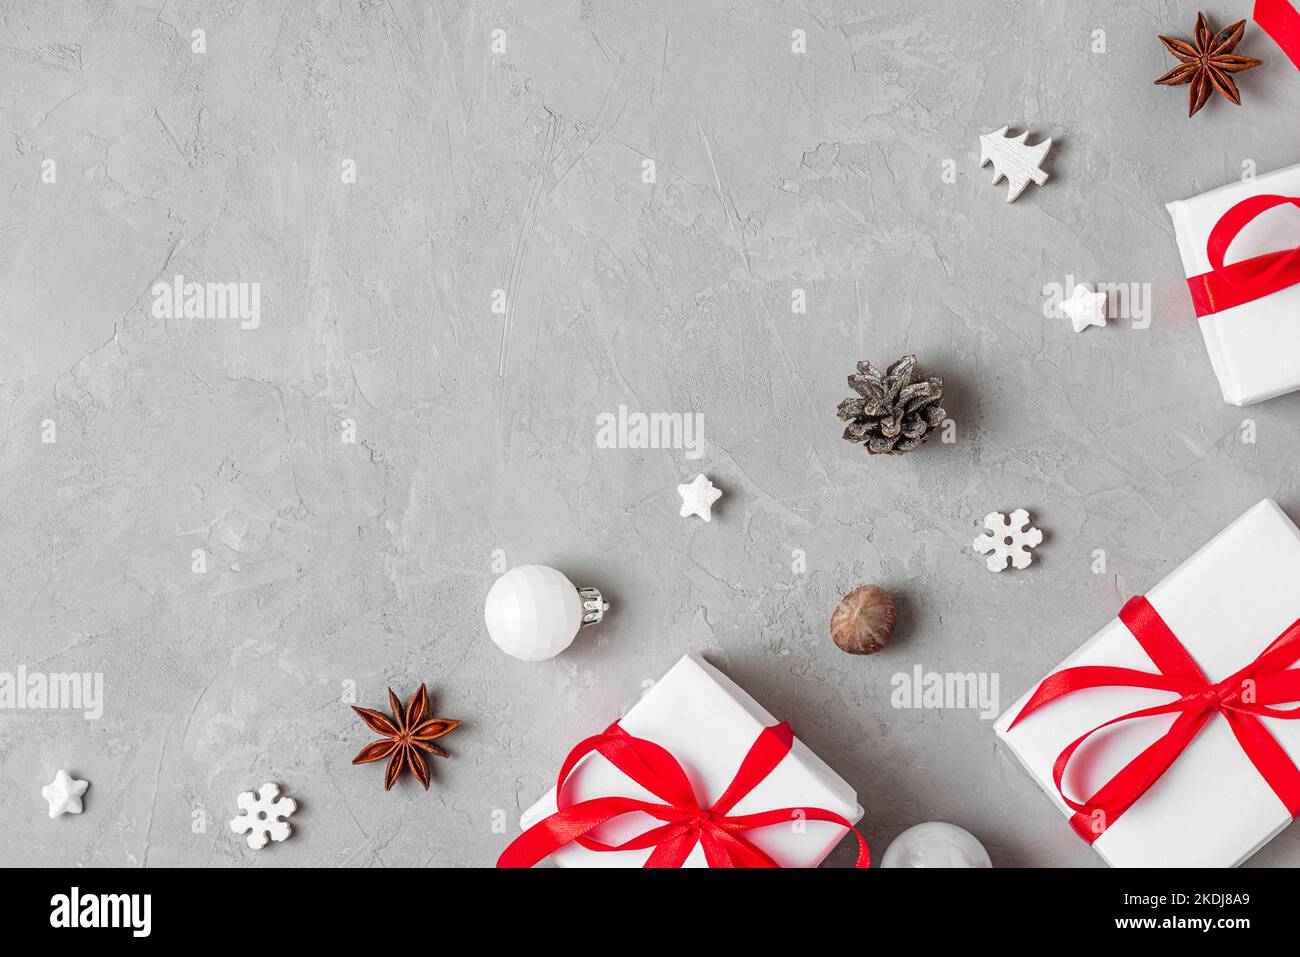 Christmas or Happy New Year composition. White gift boxes with holiday decorations on gray background. Flat lay. Top view with copy space Stock Photo